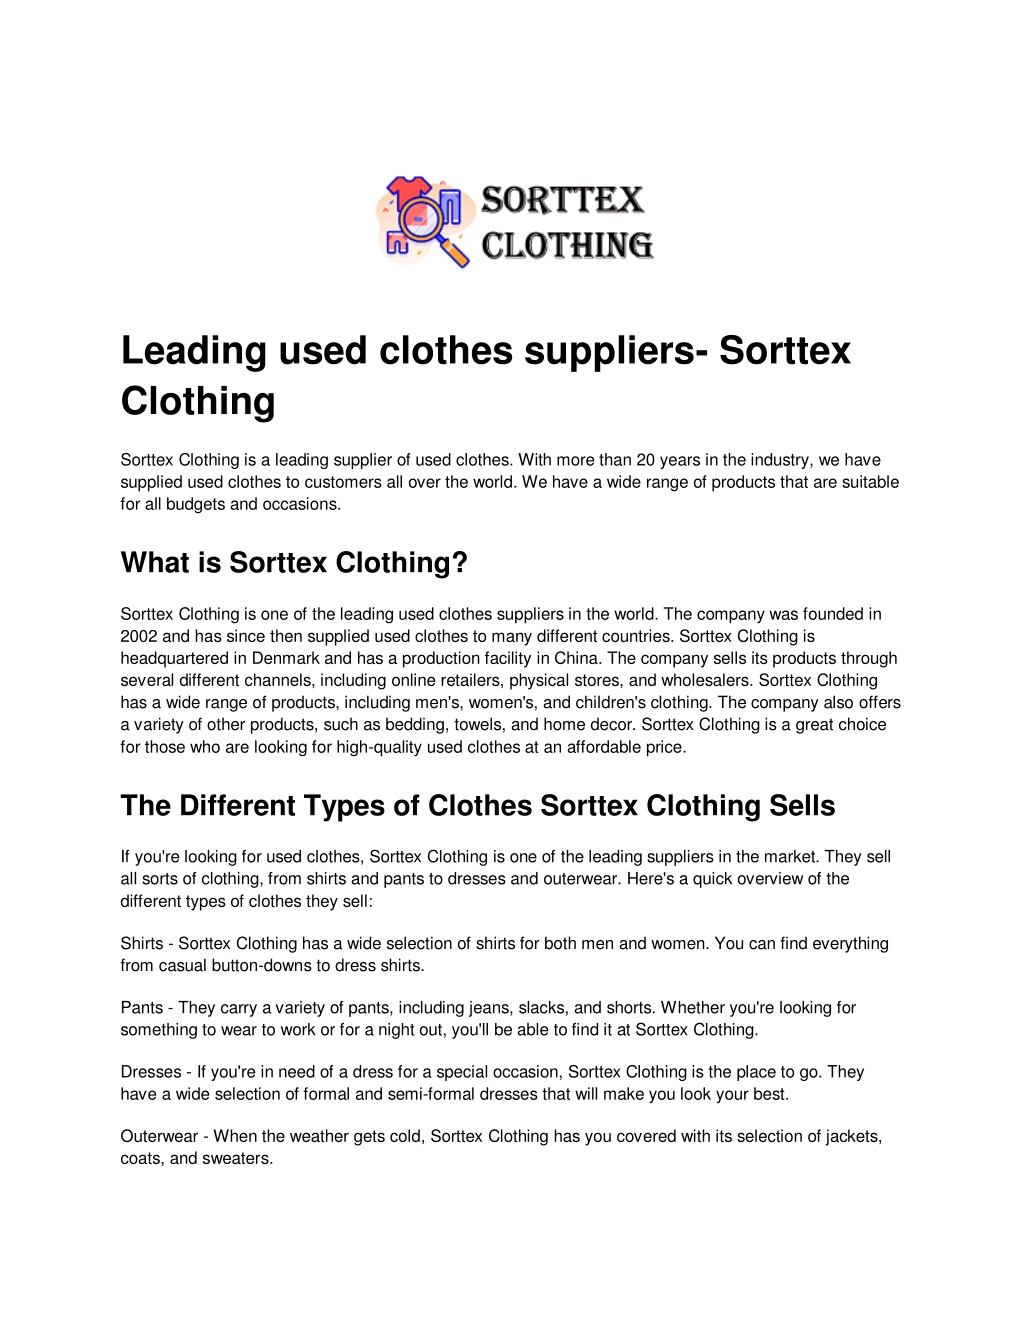 https://image6.slideserve.com/11608820/leading-used-clothes-suppliers-sorttex-clothing-l.jpg